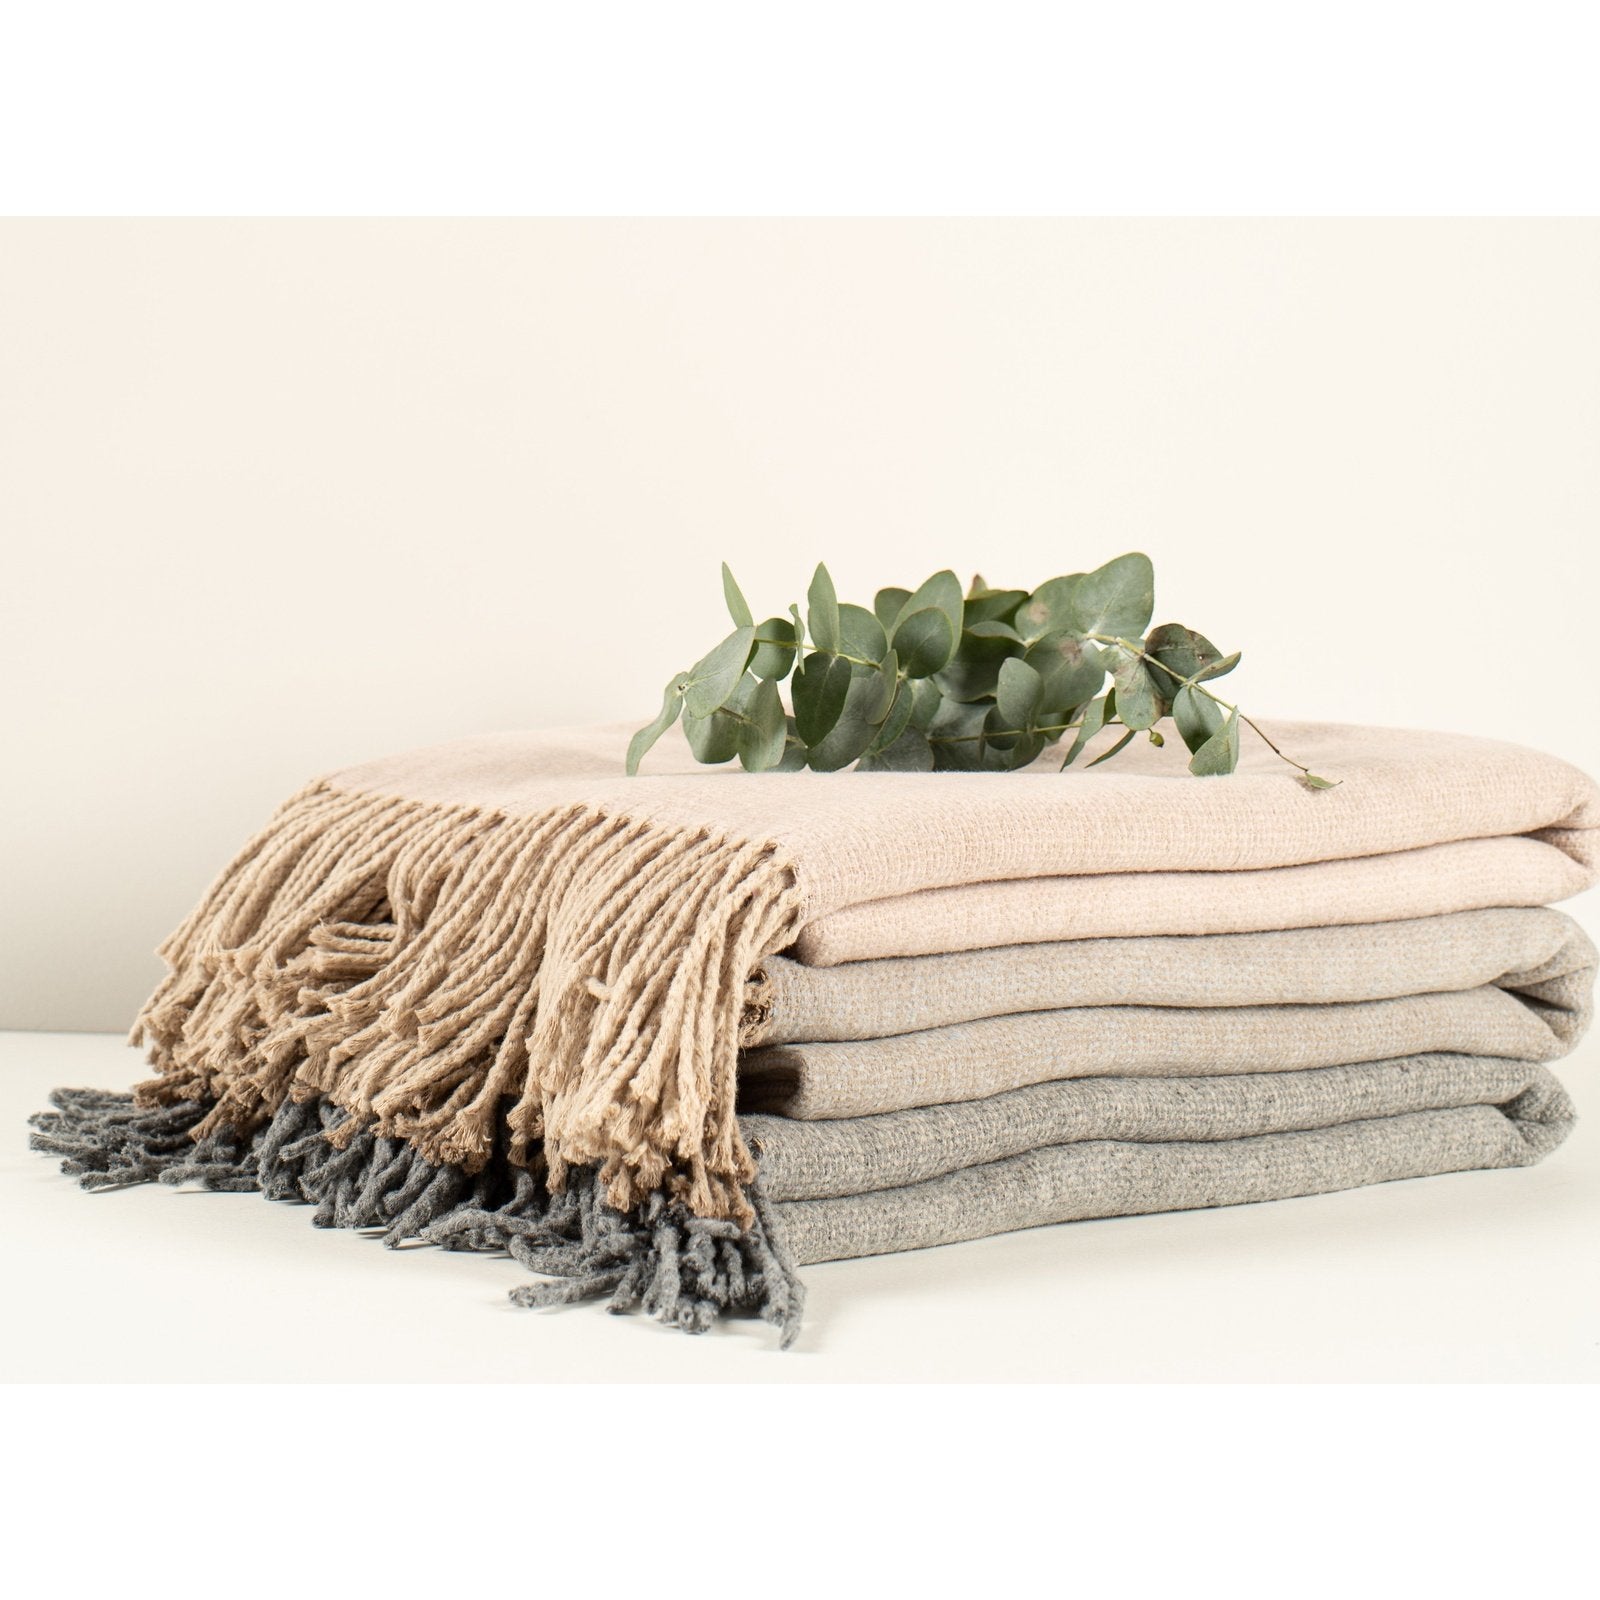 Soft-Throw-80%-cotton-blanket-Jane-available-in-3-colors